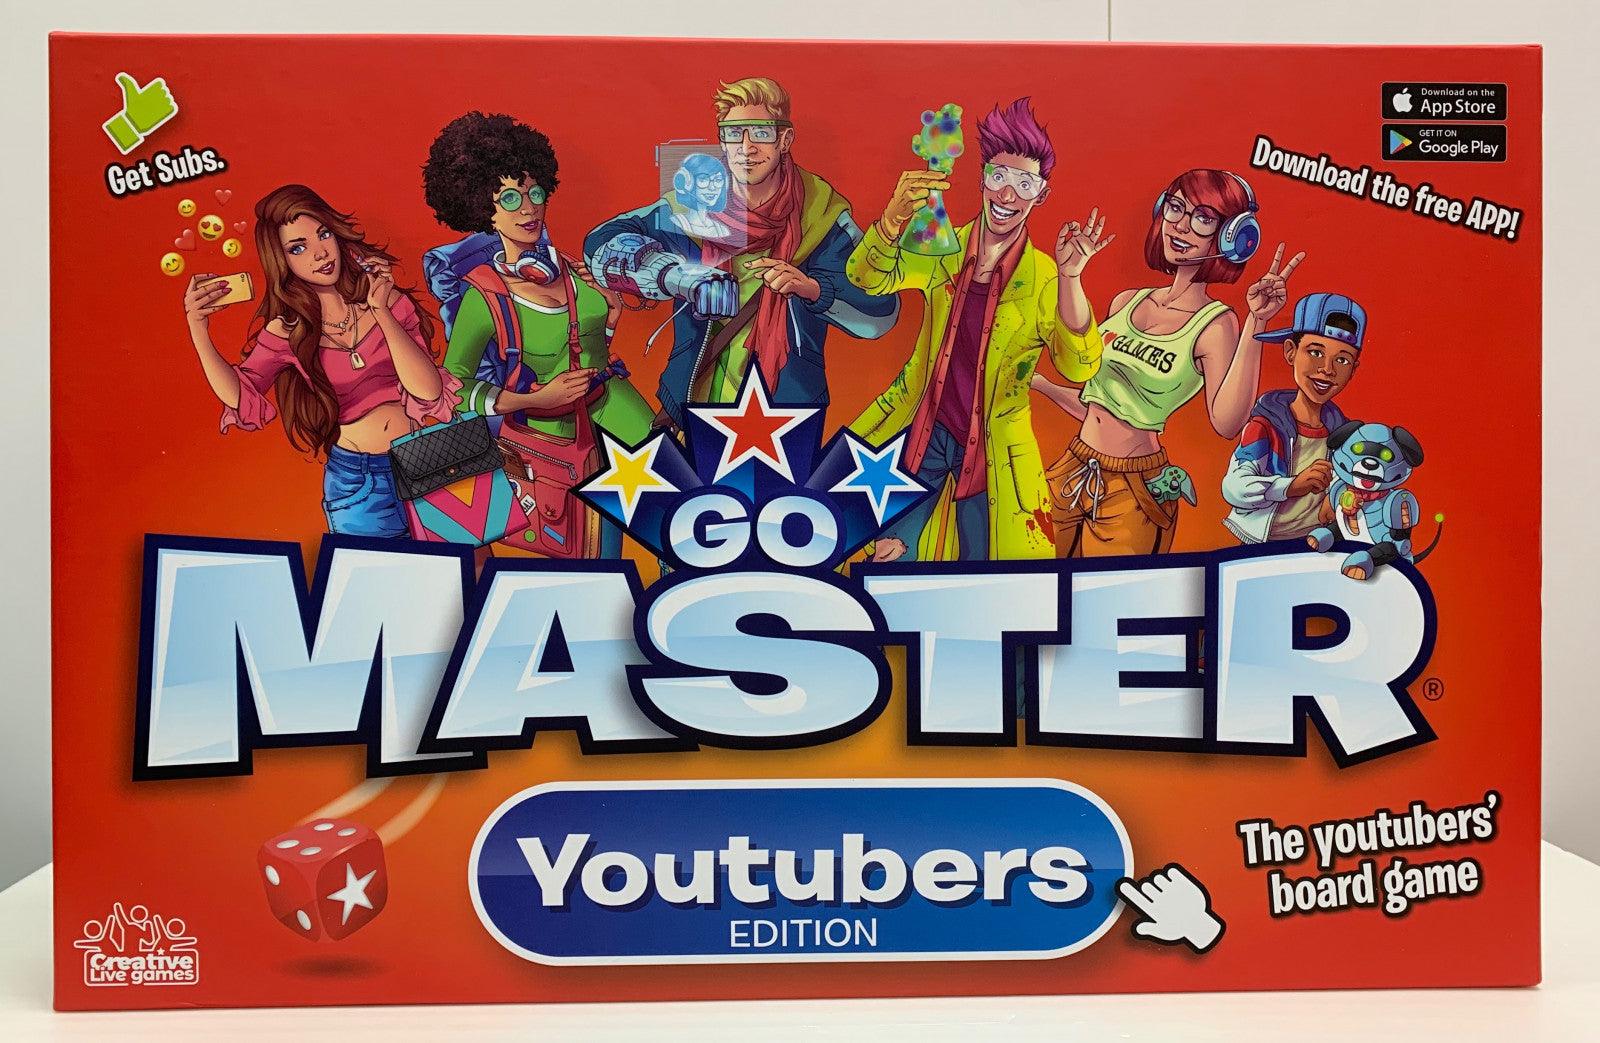 VR-82581 Go Master Youtubers Edition - Gyrating Hamsters - Titan Pop Culture